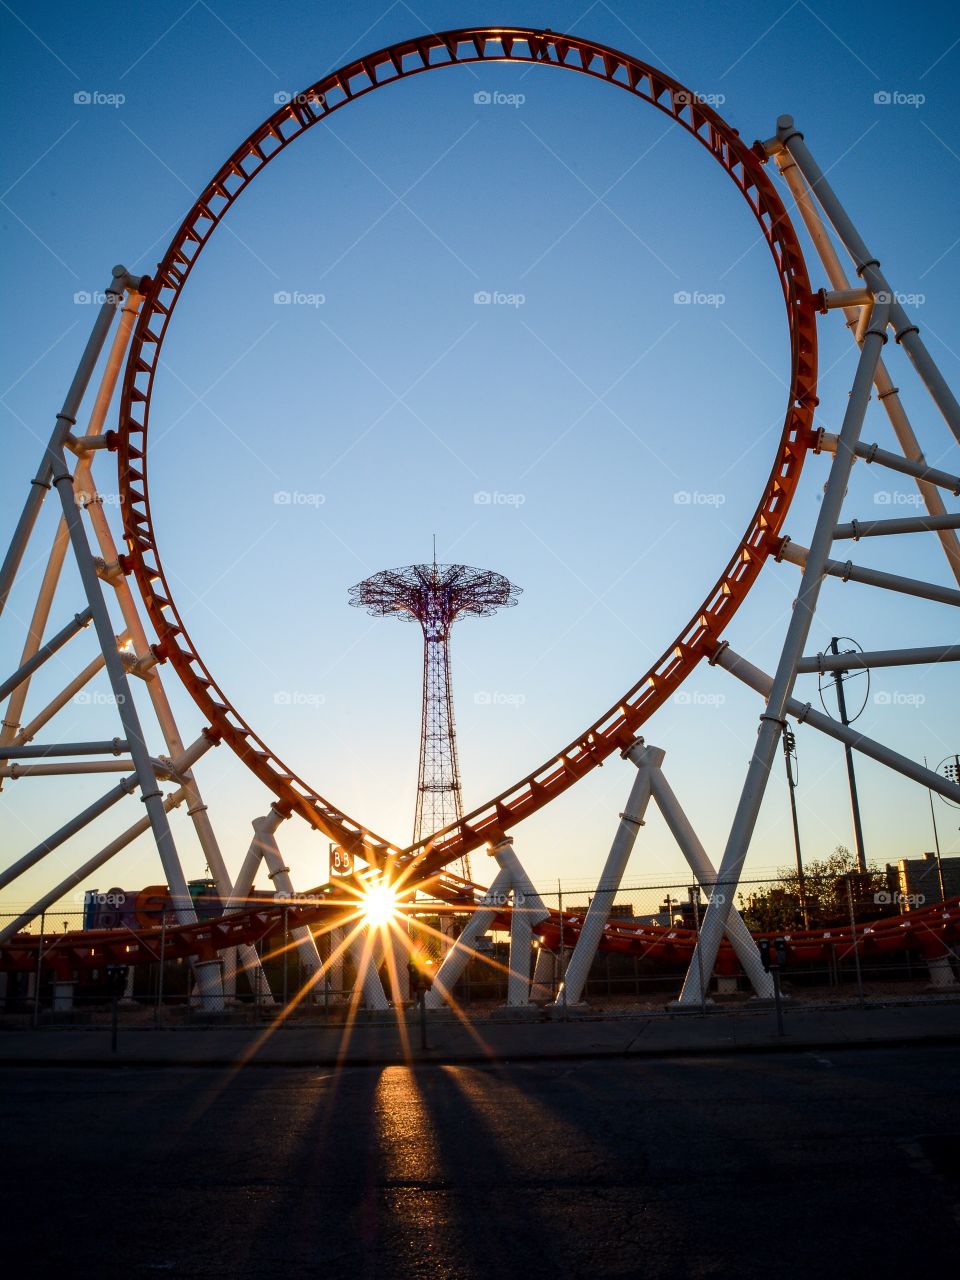 Parachute jump seen through Thunderbolt ride with some sun flares in Coney Island